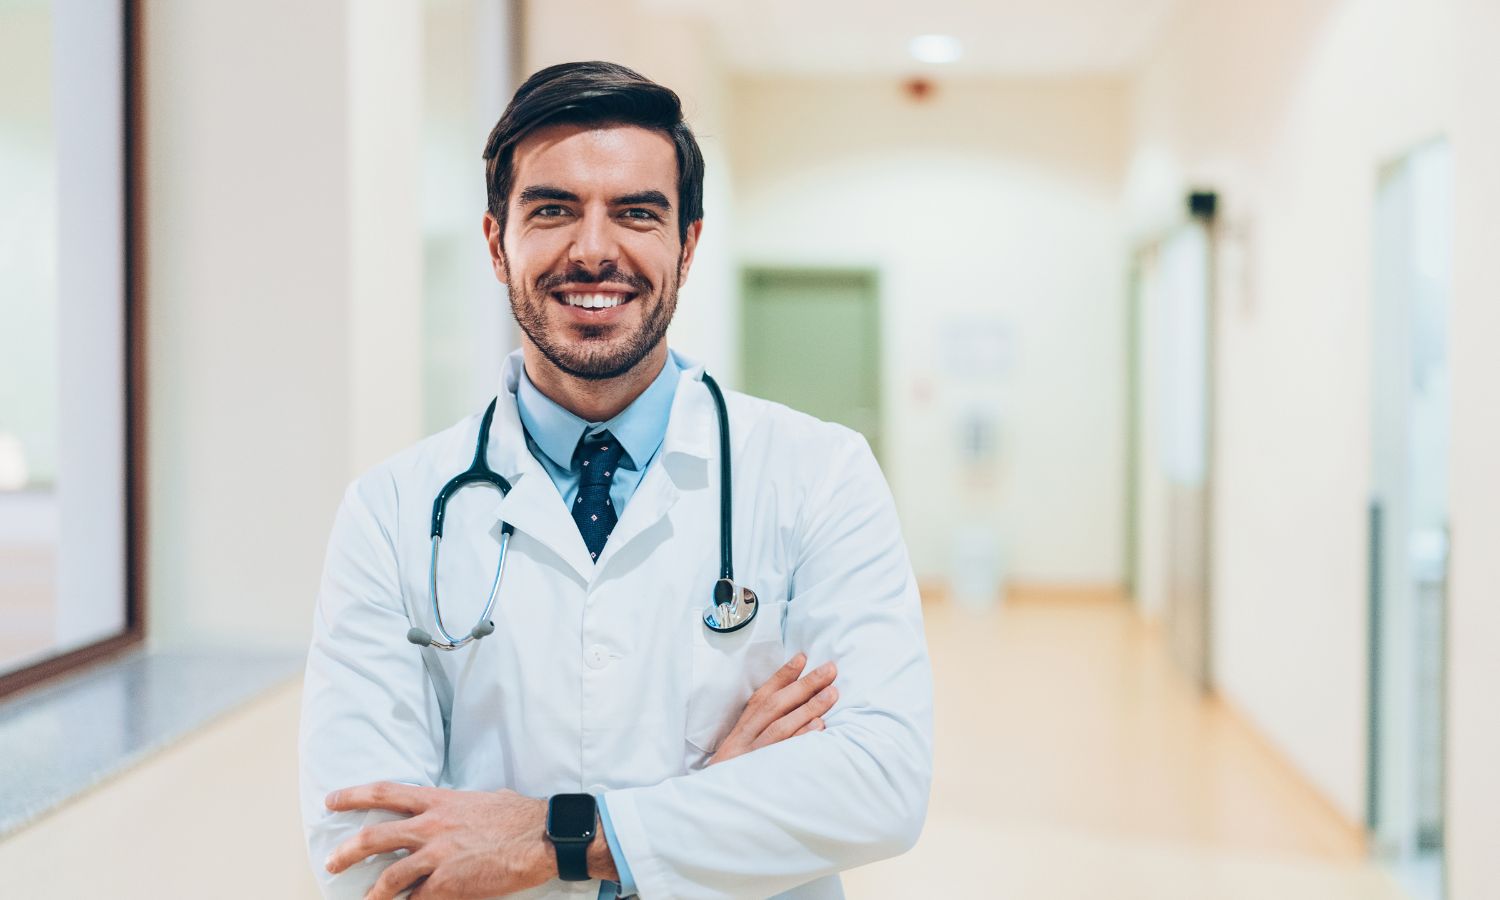 How to Find a Good Doctor